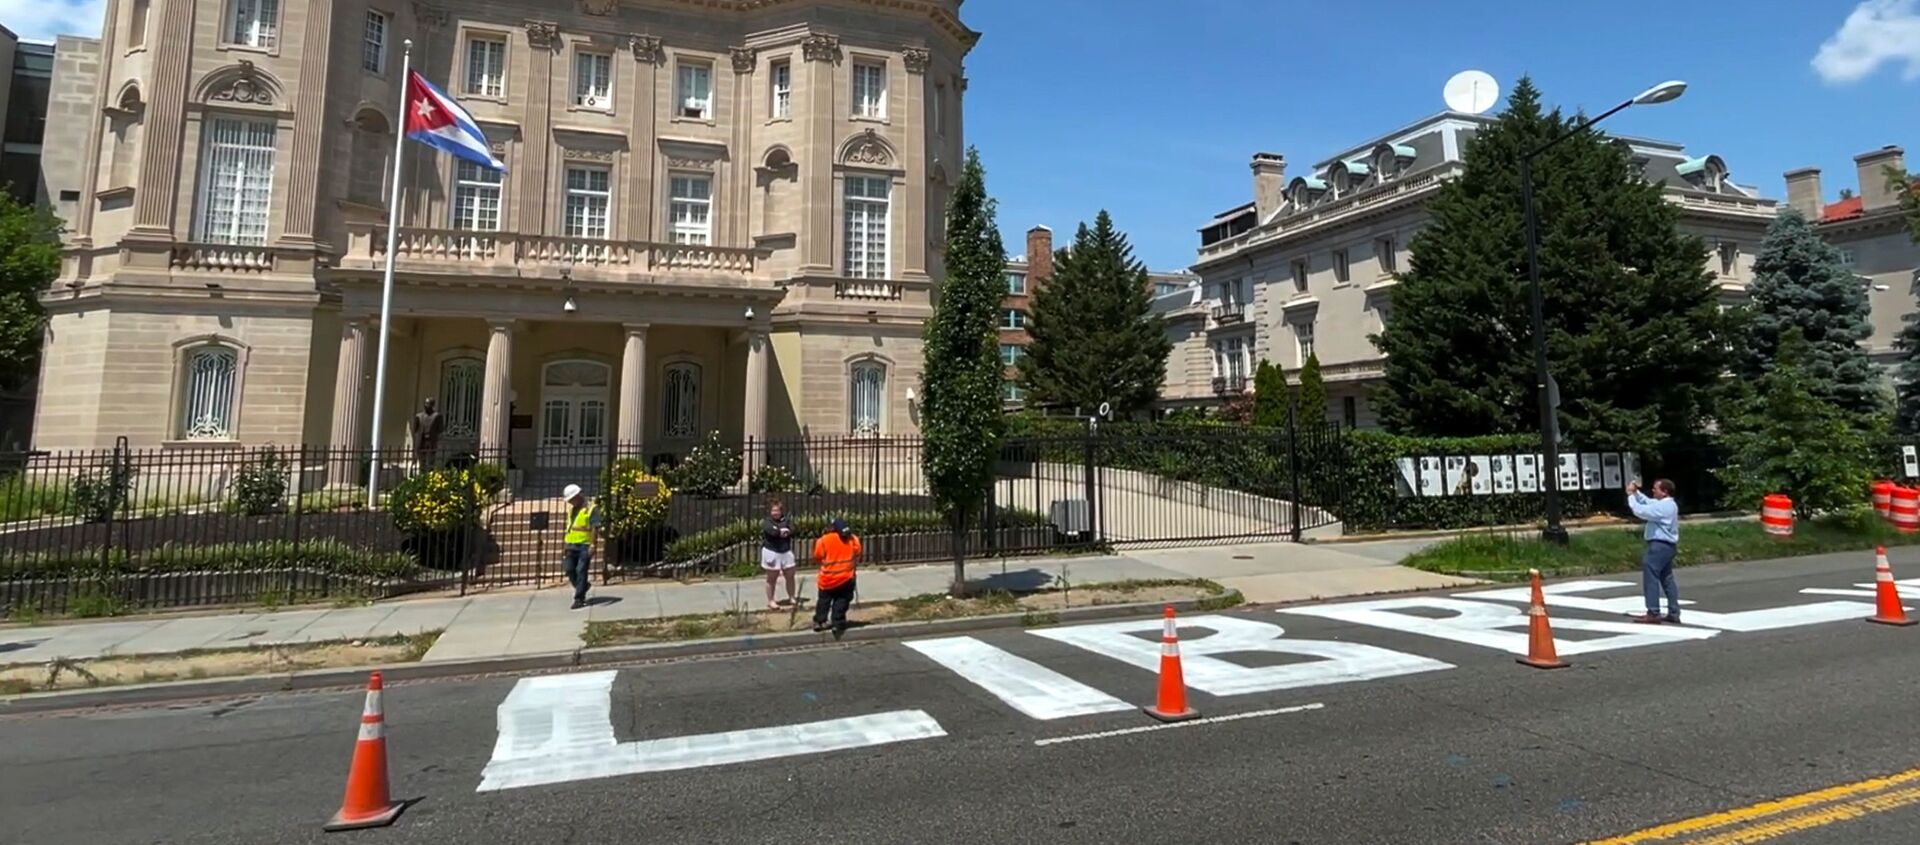 The message Cuba Libre or 'free Cuba', is seen painted in giant block lettering on the street directly in front of the Cuban embassy in this frame grab from video shot in Washington, U.S., July 16, 2021 - Sputnik International, 1920, 17.07.2021